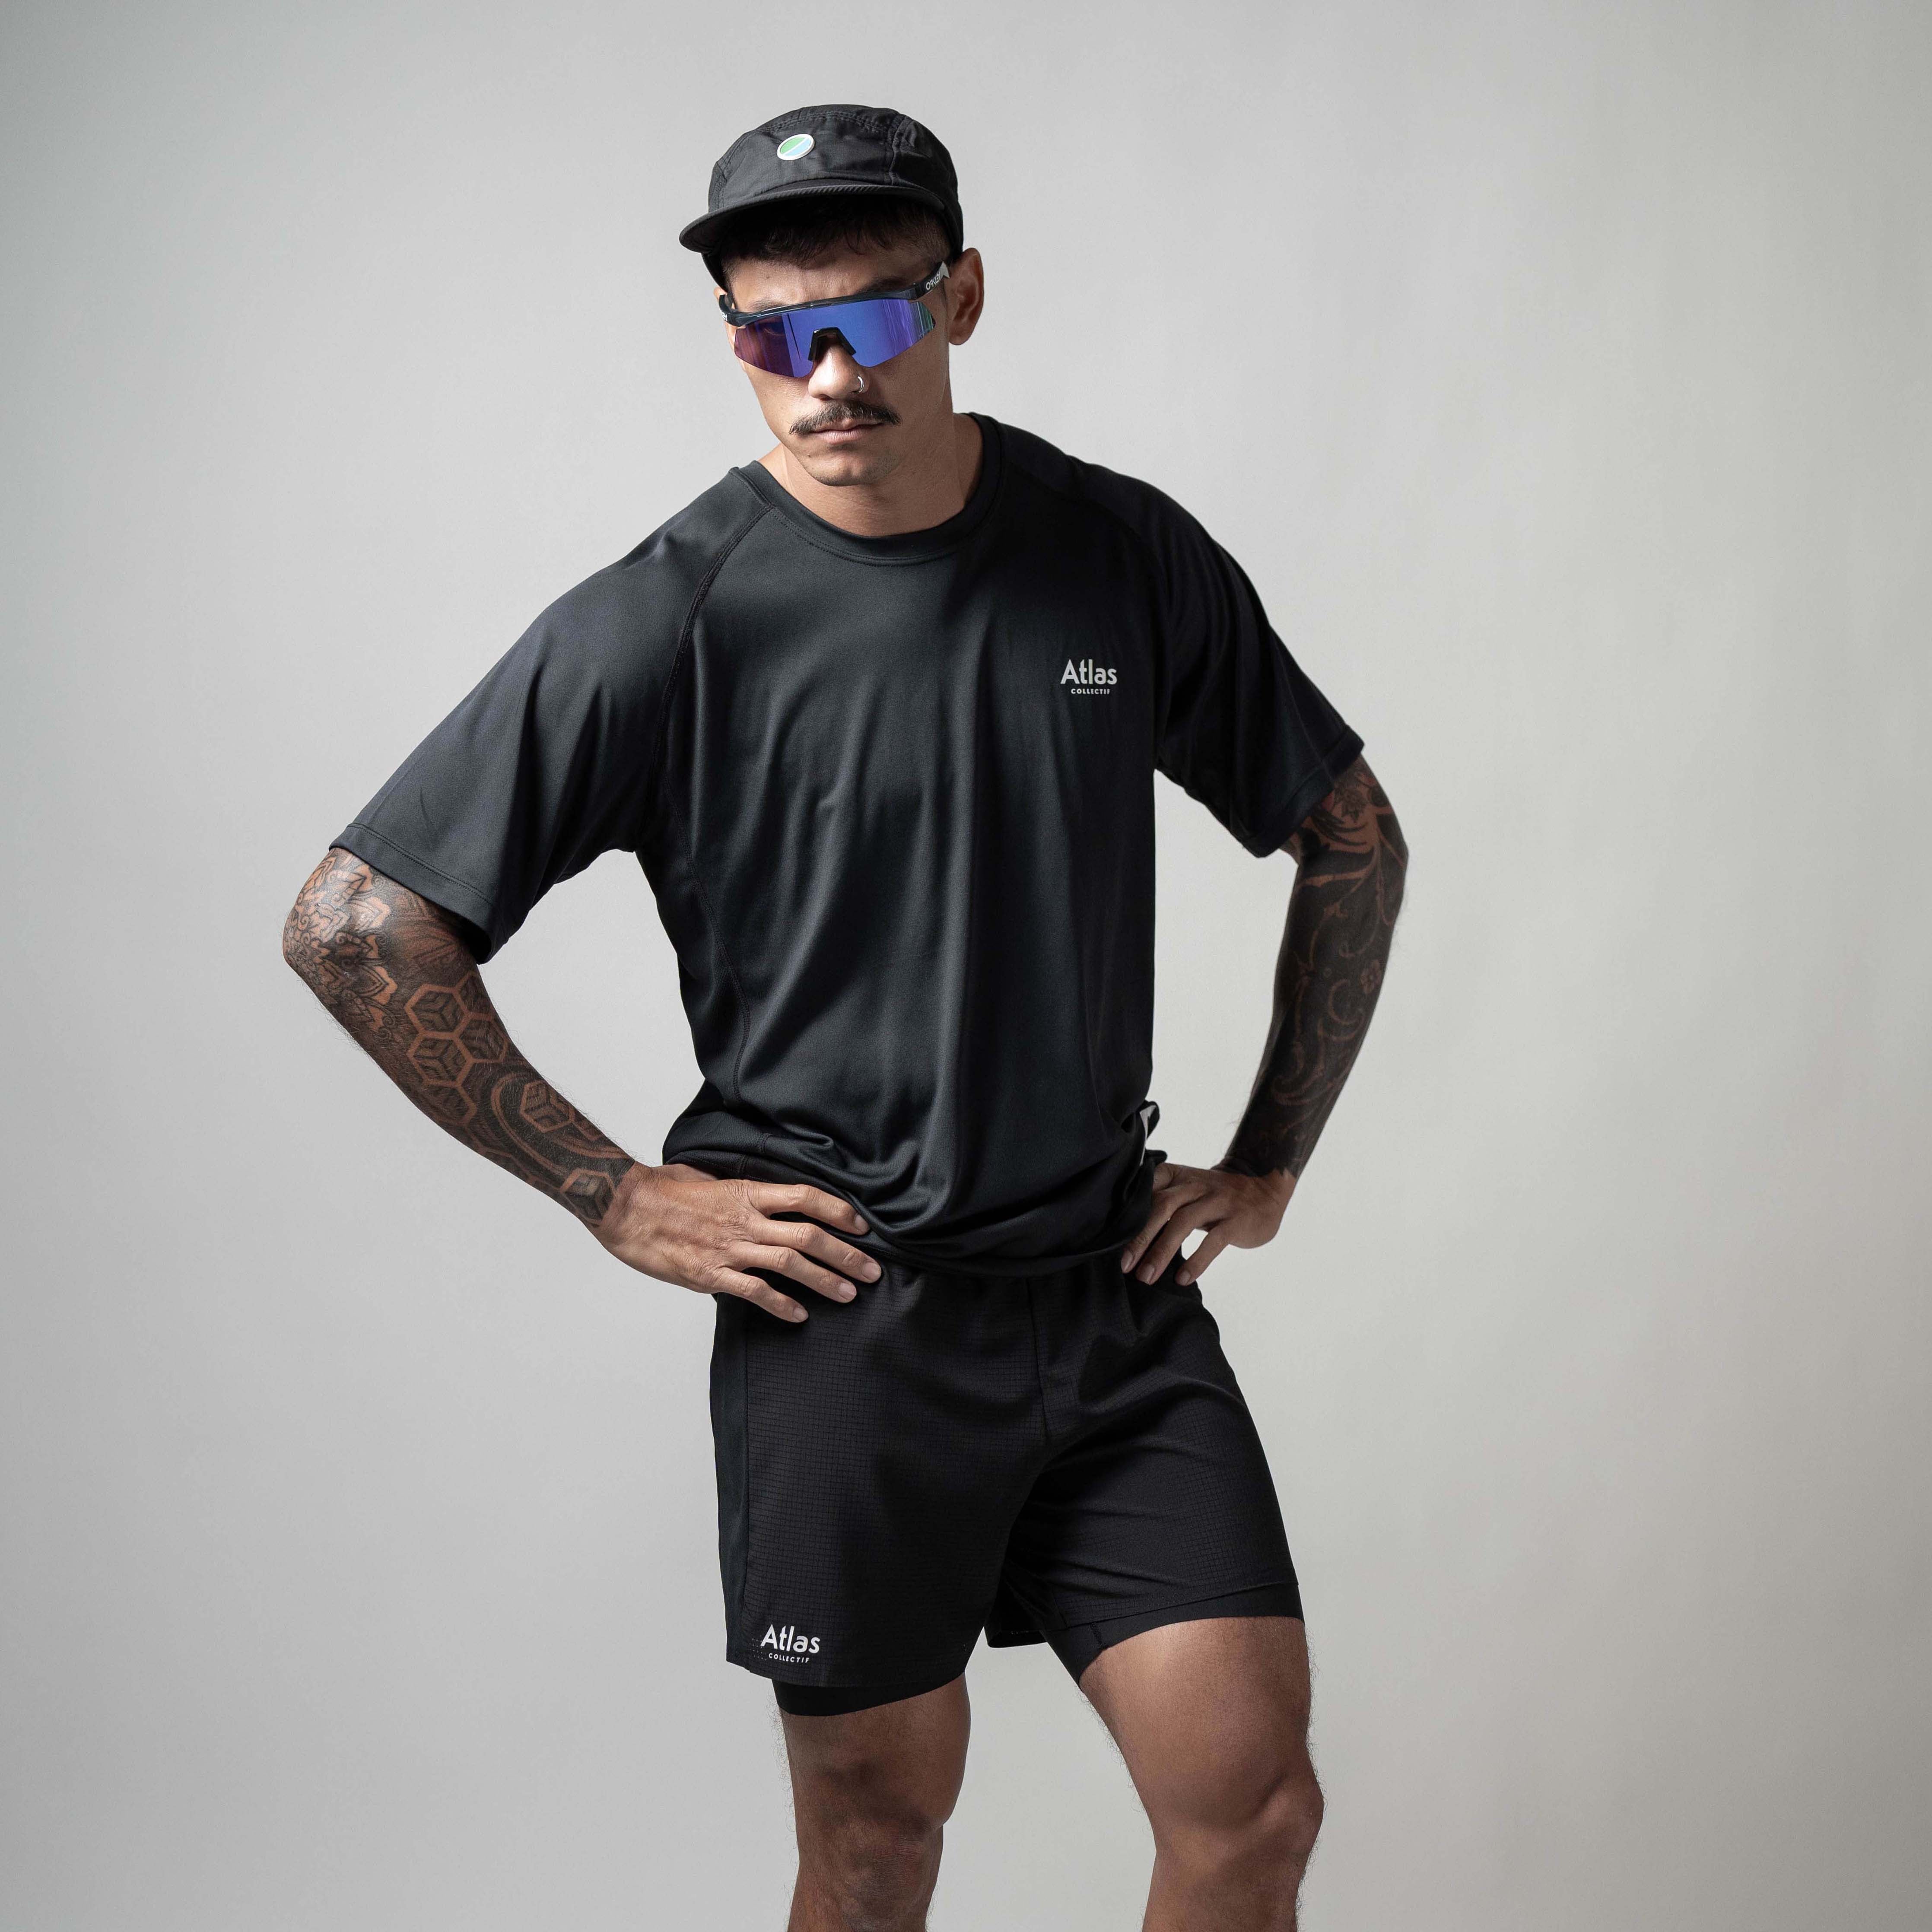 in Shorts 1 2 Running - Collectif Atlas Black Core